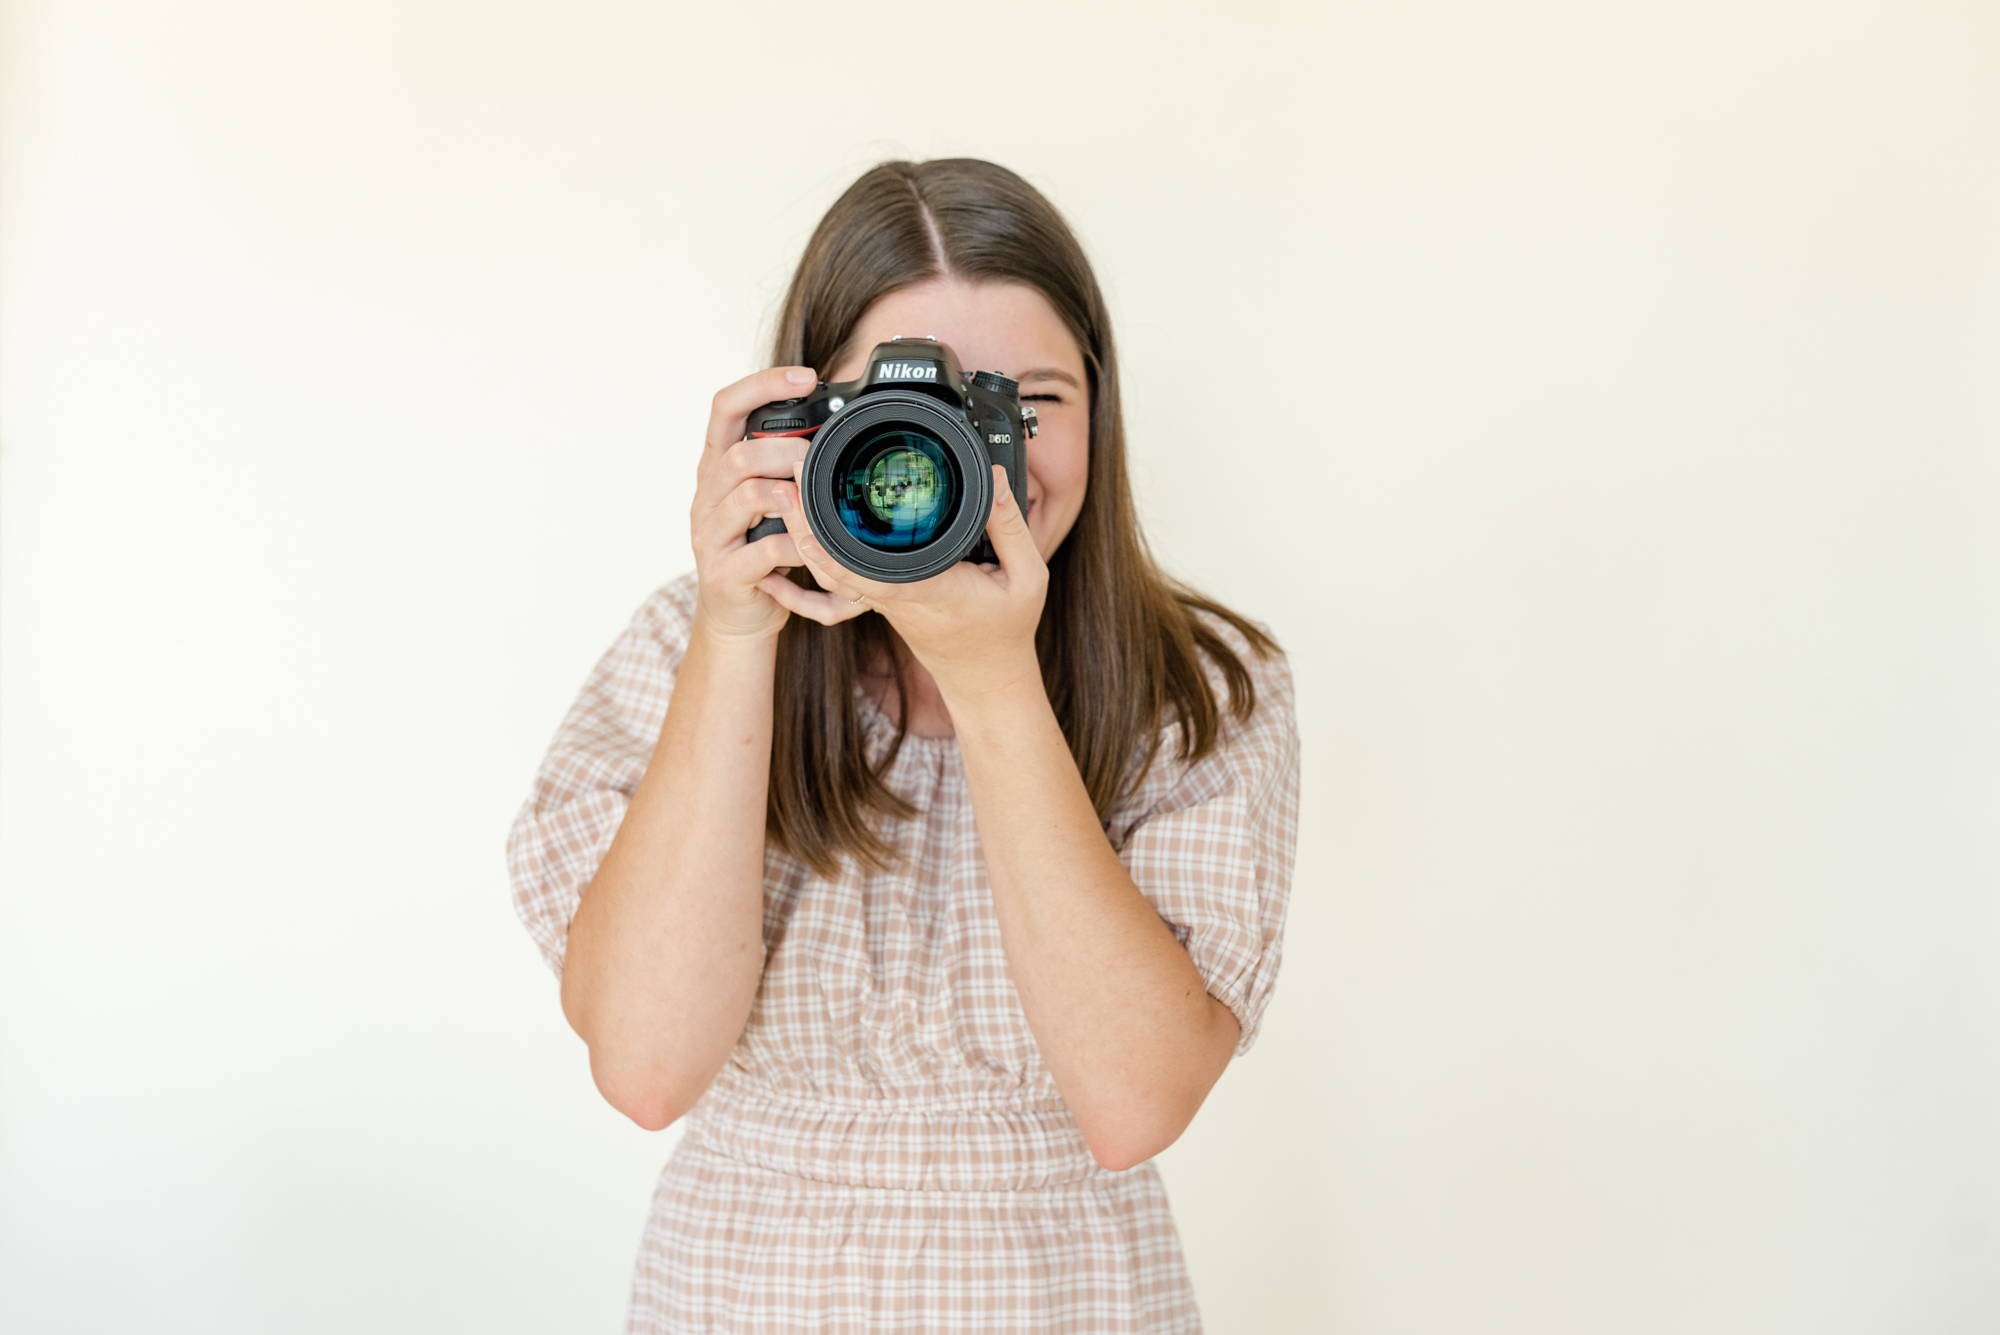 How to Confidently Raise Your Prices as a Photographer